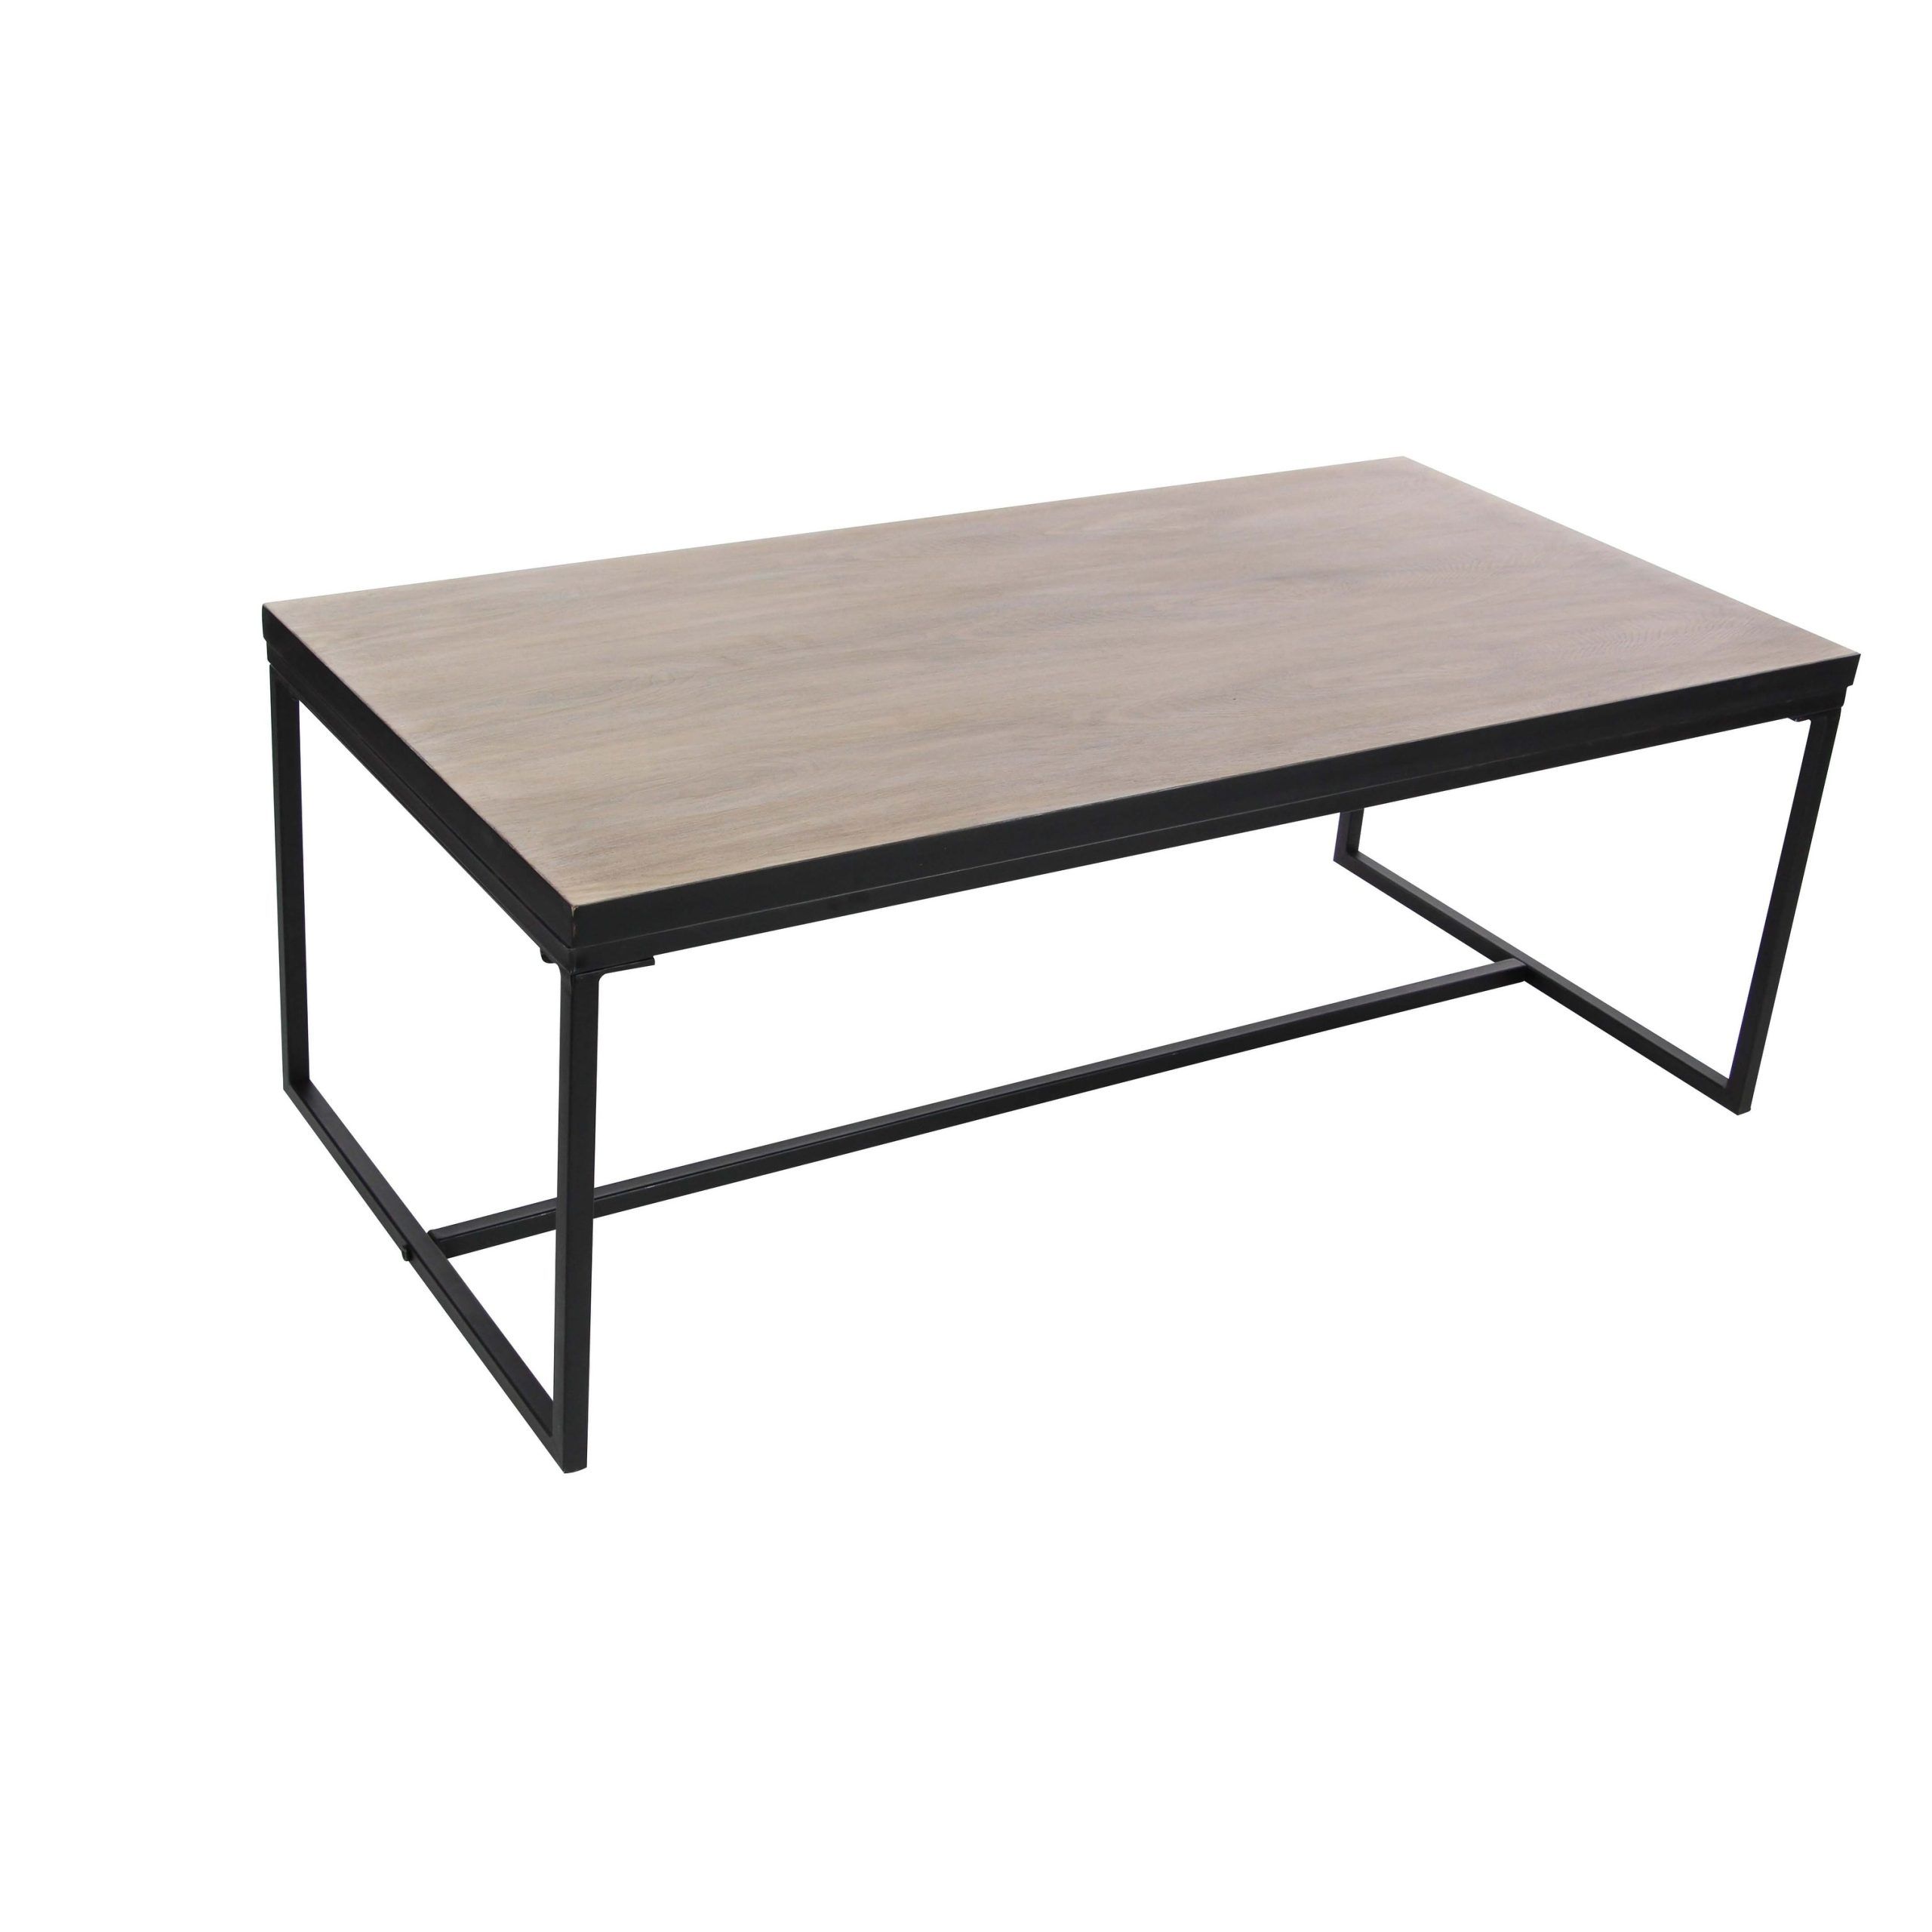 Modern 18 X 47 Inch Iron And Pine Wood Coffee Tablestudio 350 – Bed  Bath & Beyond – 17240580 Throughout Studio 350 Black Metal Coffee Tables (View 7 of 15)